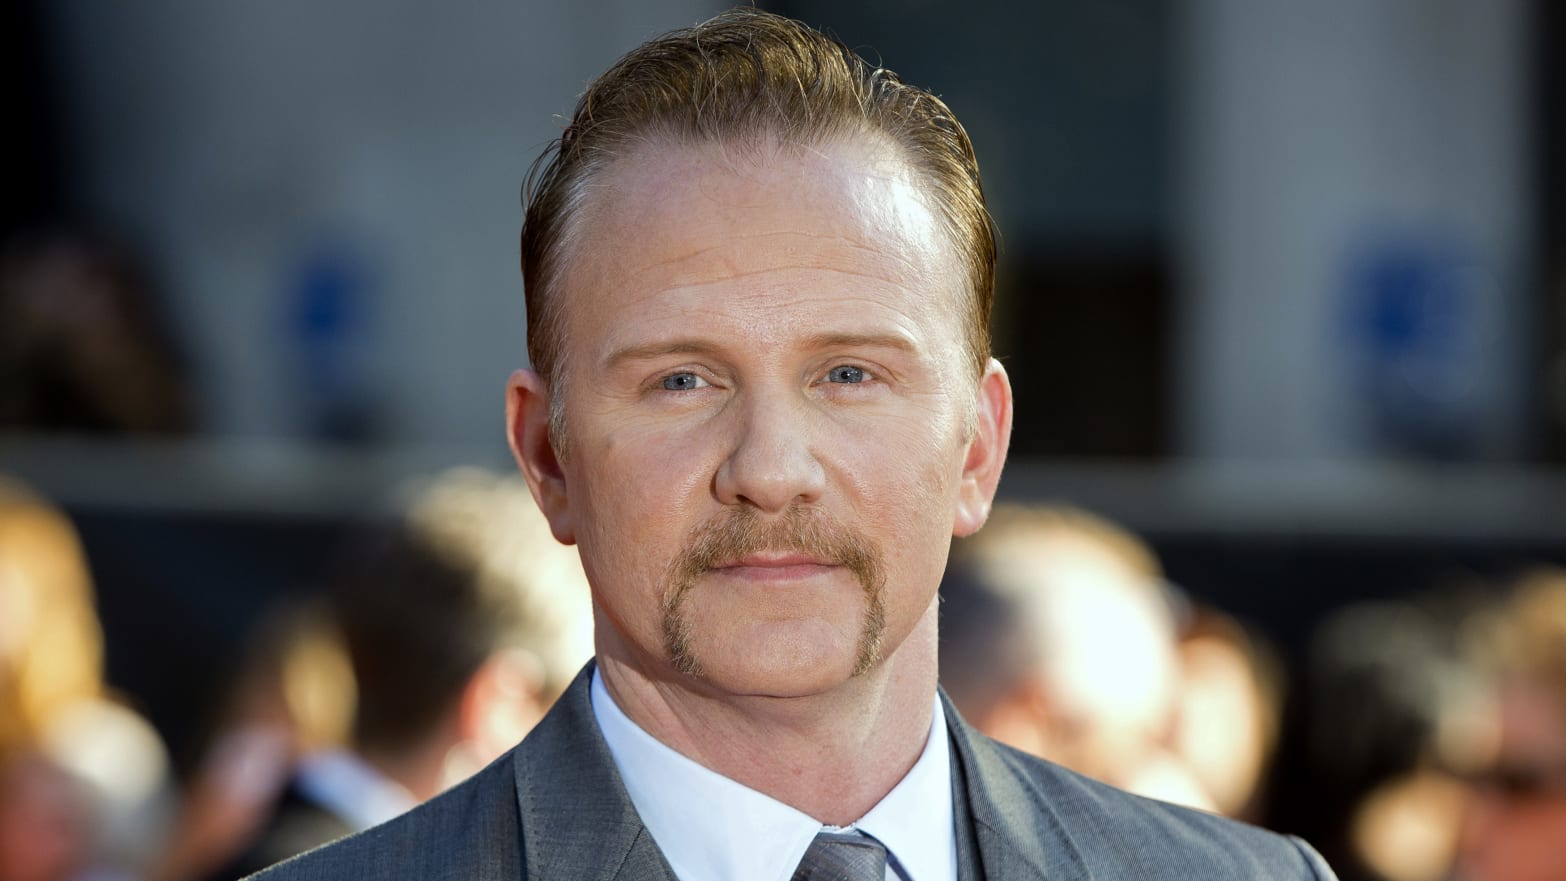 Morgan Spurlock, the director of “Super Size Me,” has died.